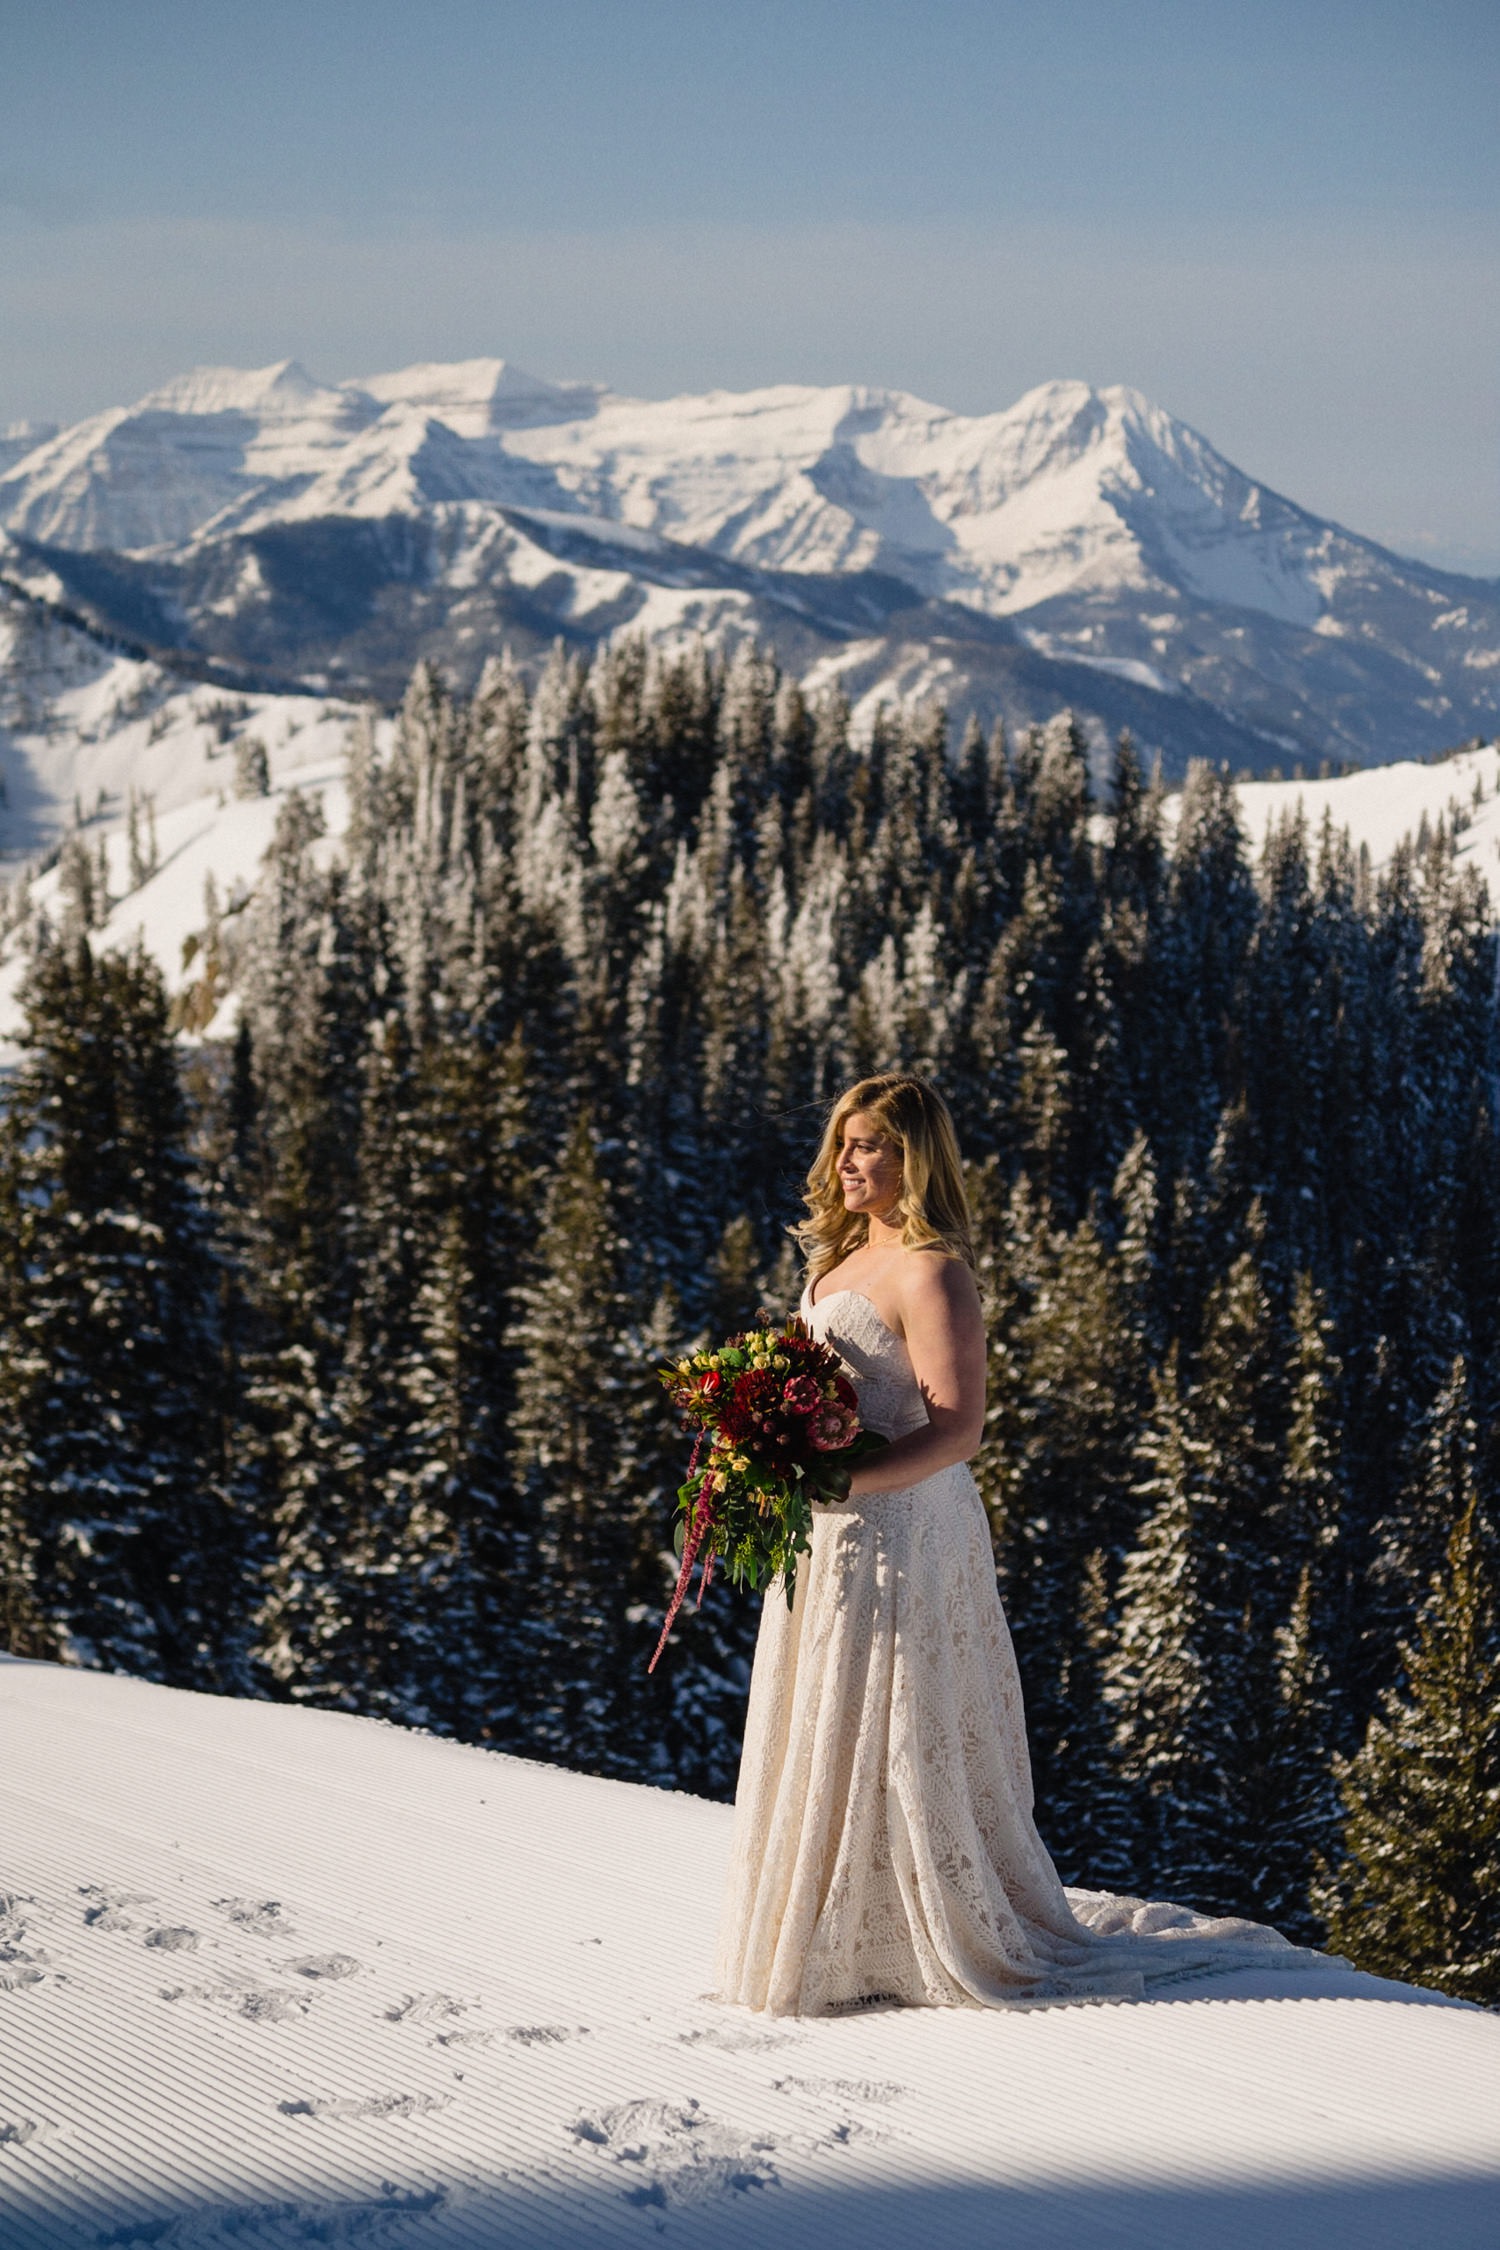 Bride in wedding dress on snowy peak with snow covered mountains behind her. 